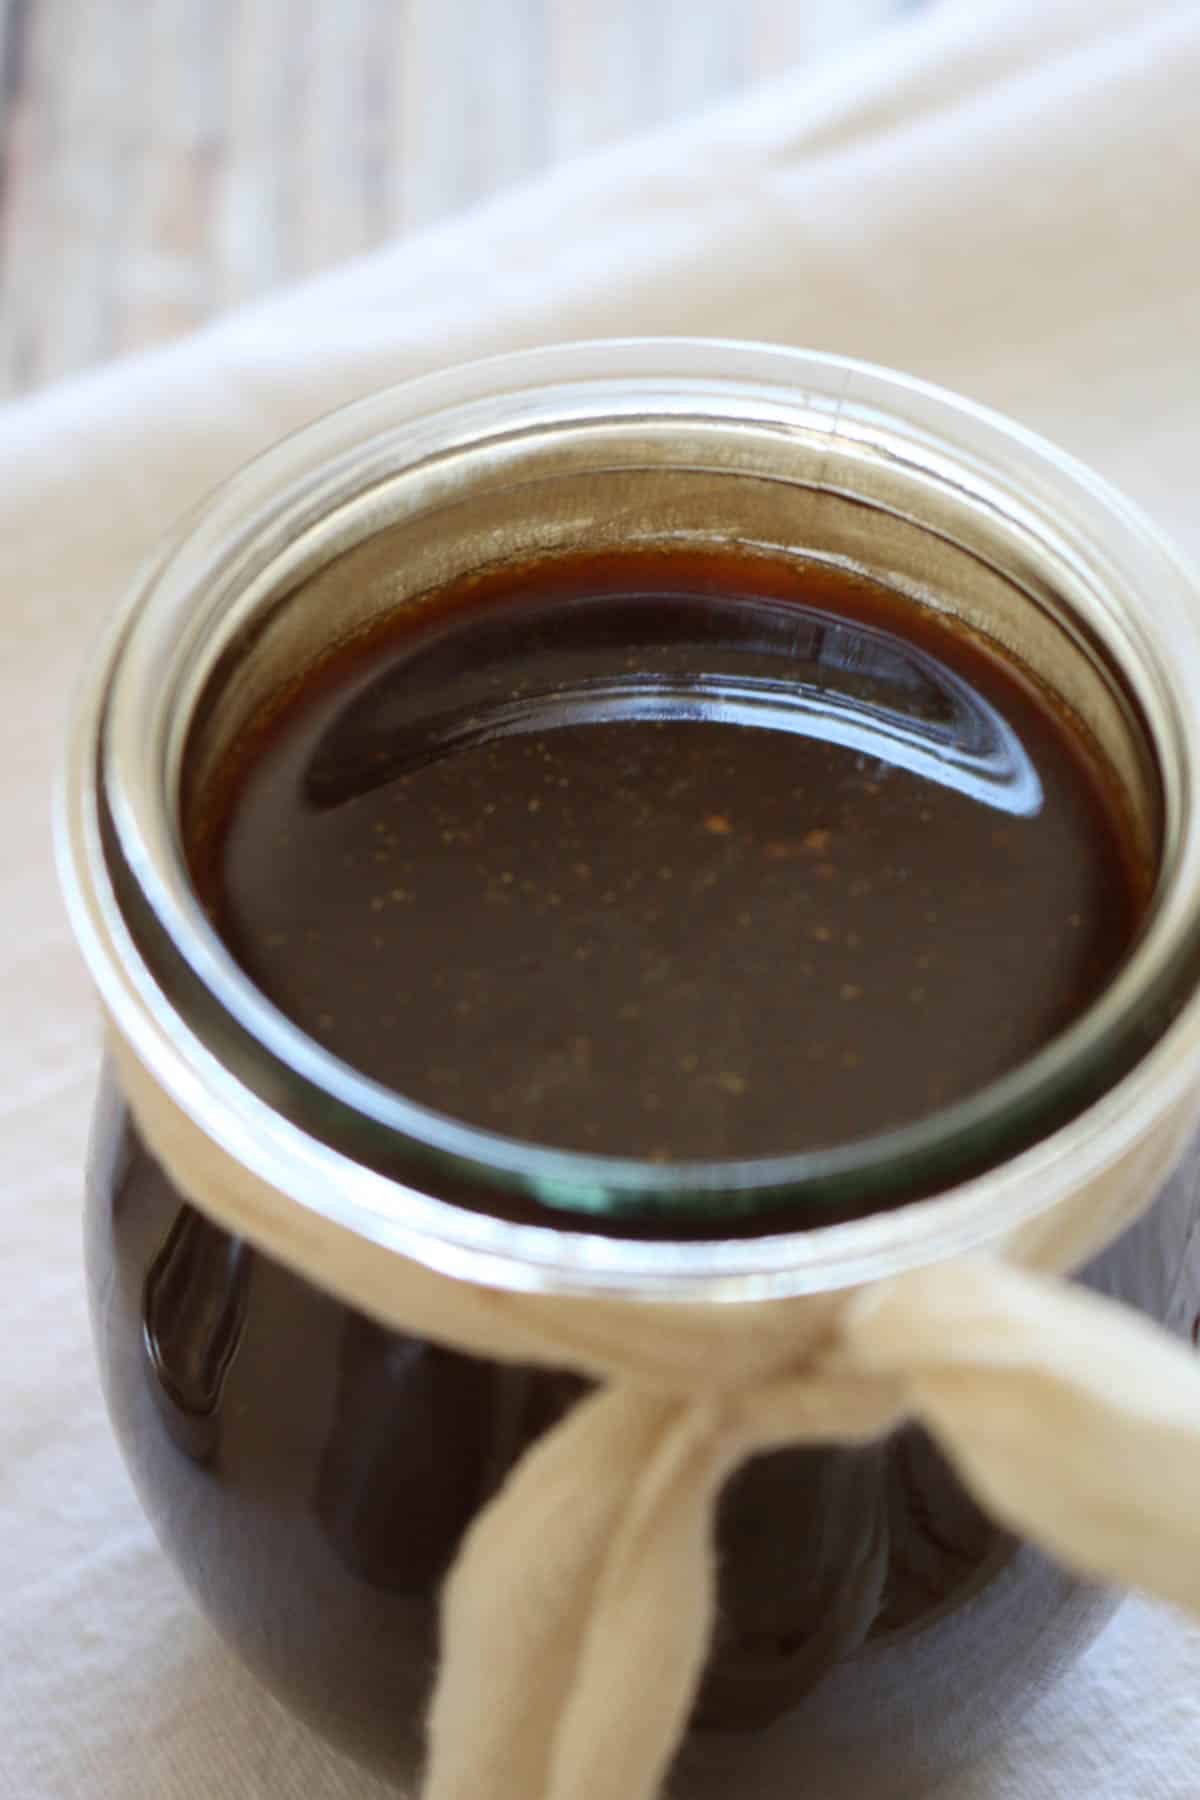 worcestershire sauce in weck tulip jar with bow.